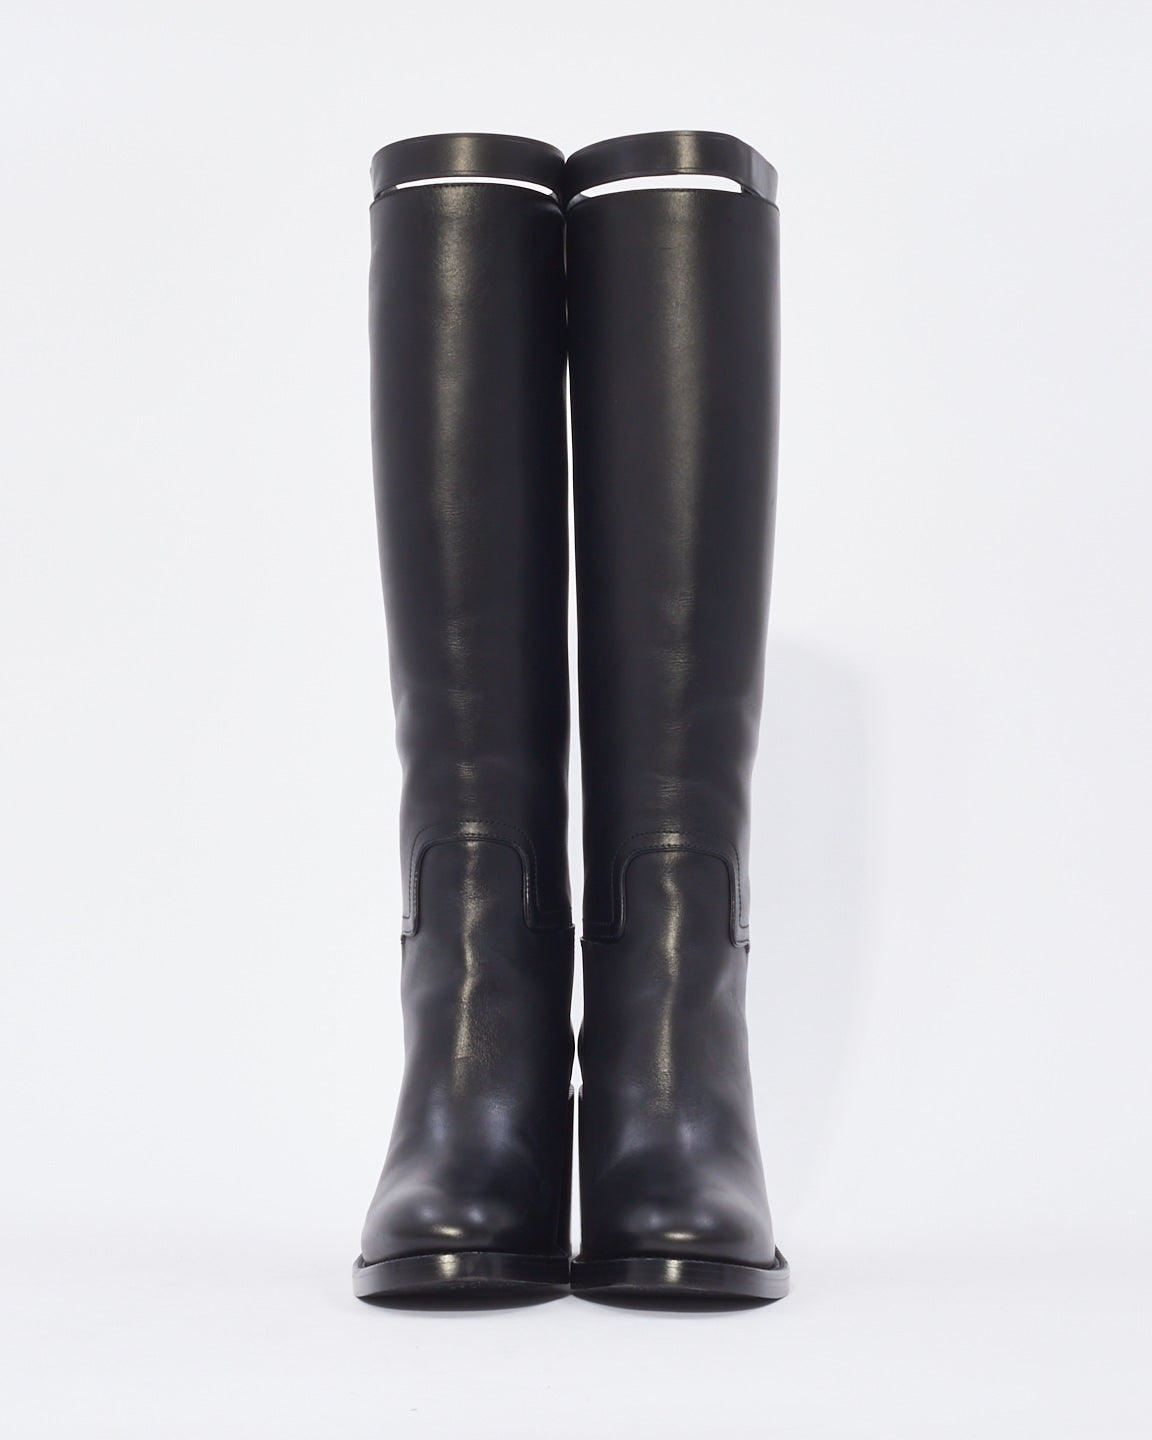 Burberry Black Leather Knee High Boots - 38.5